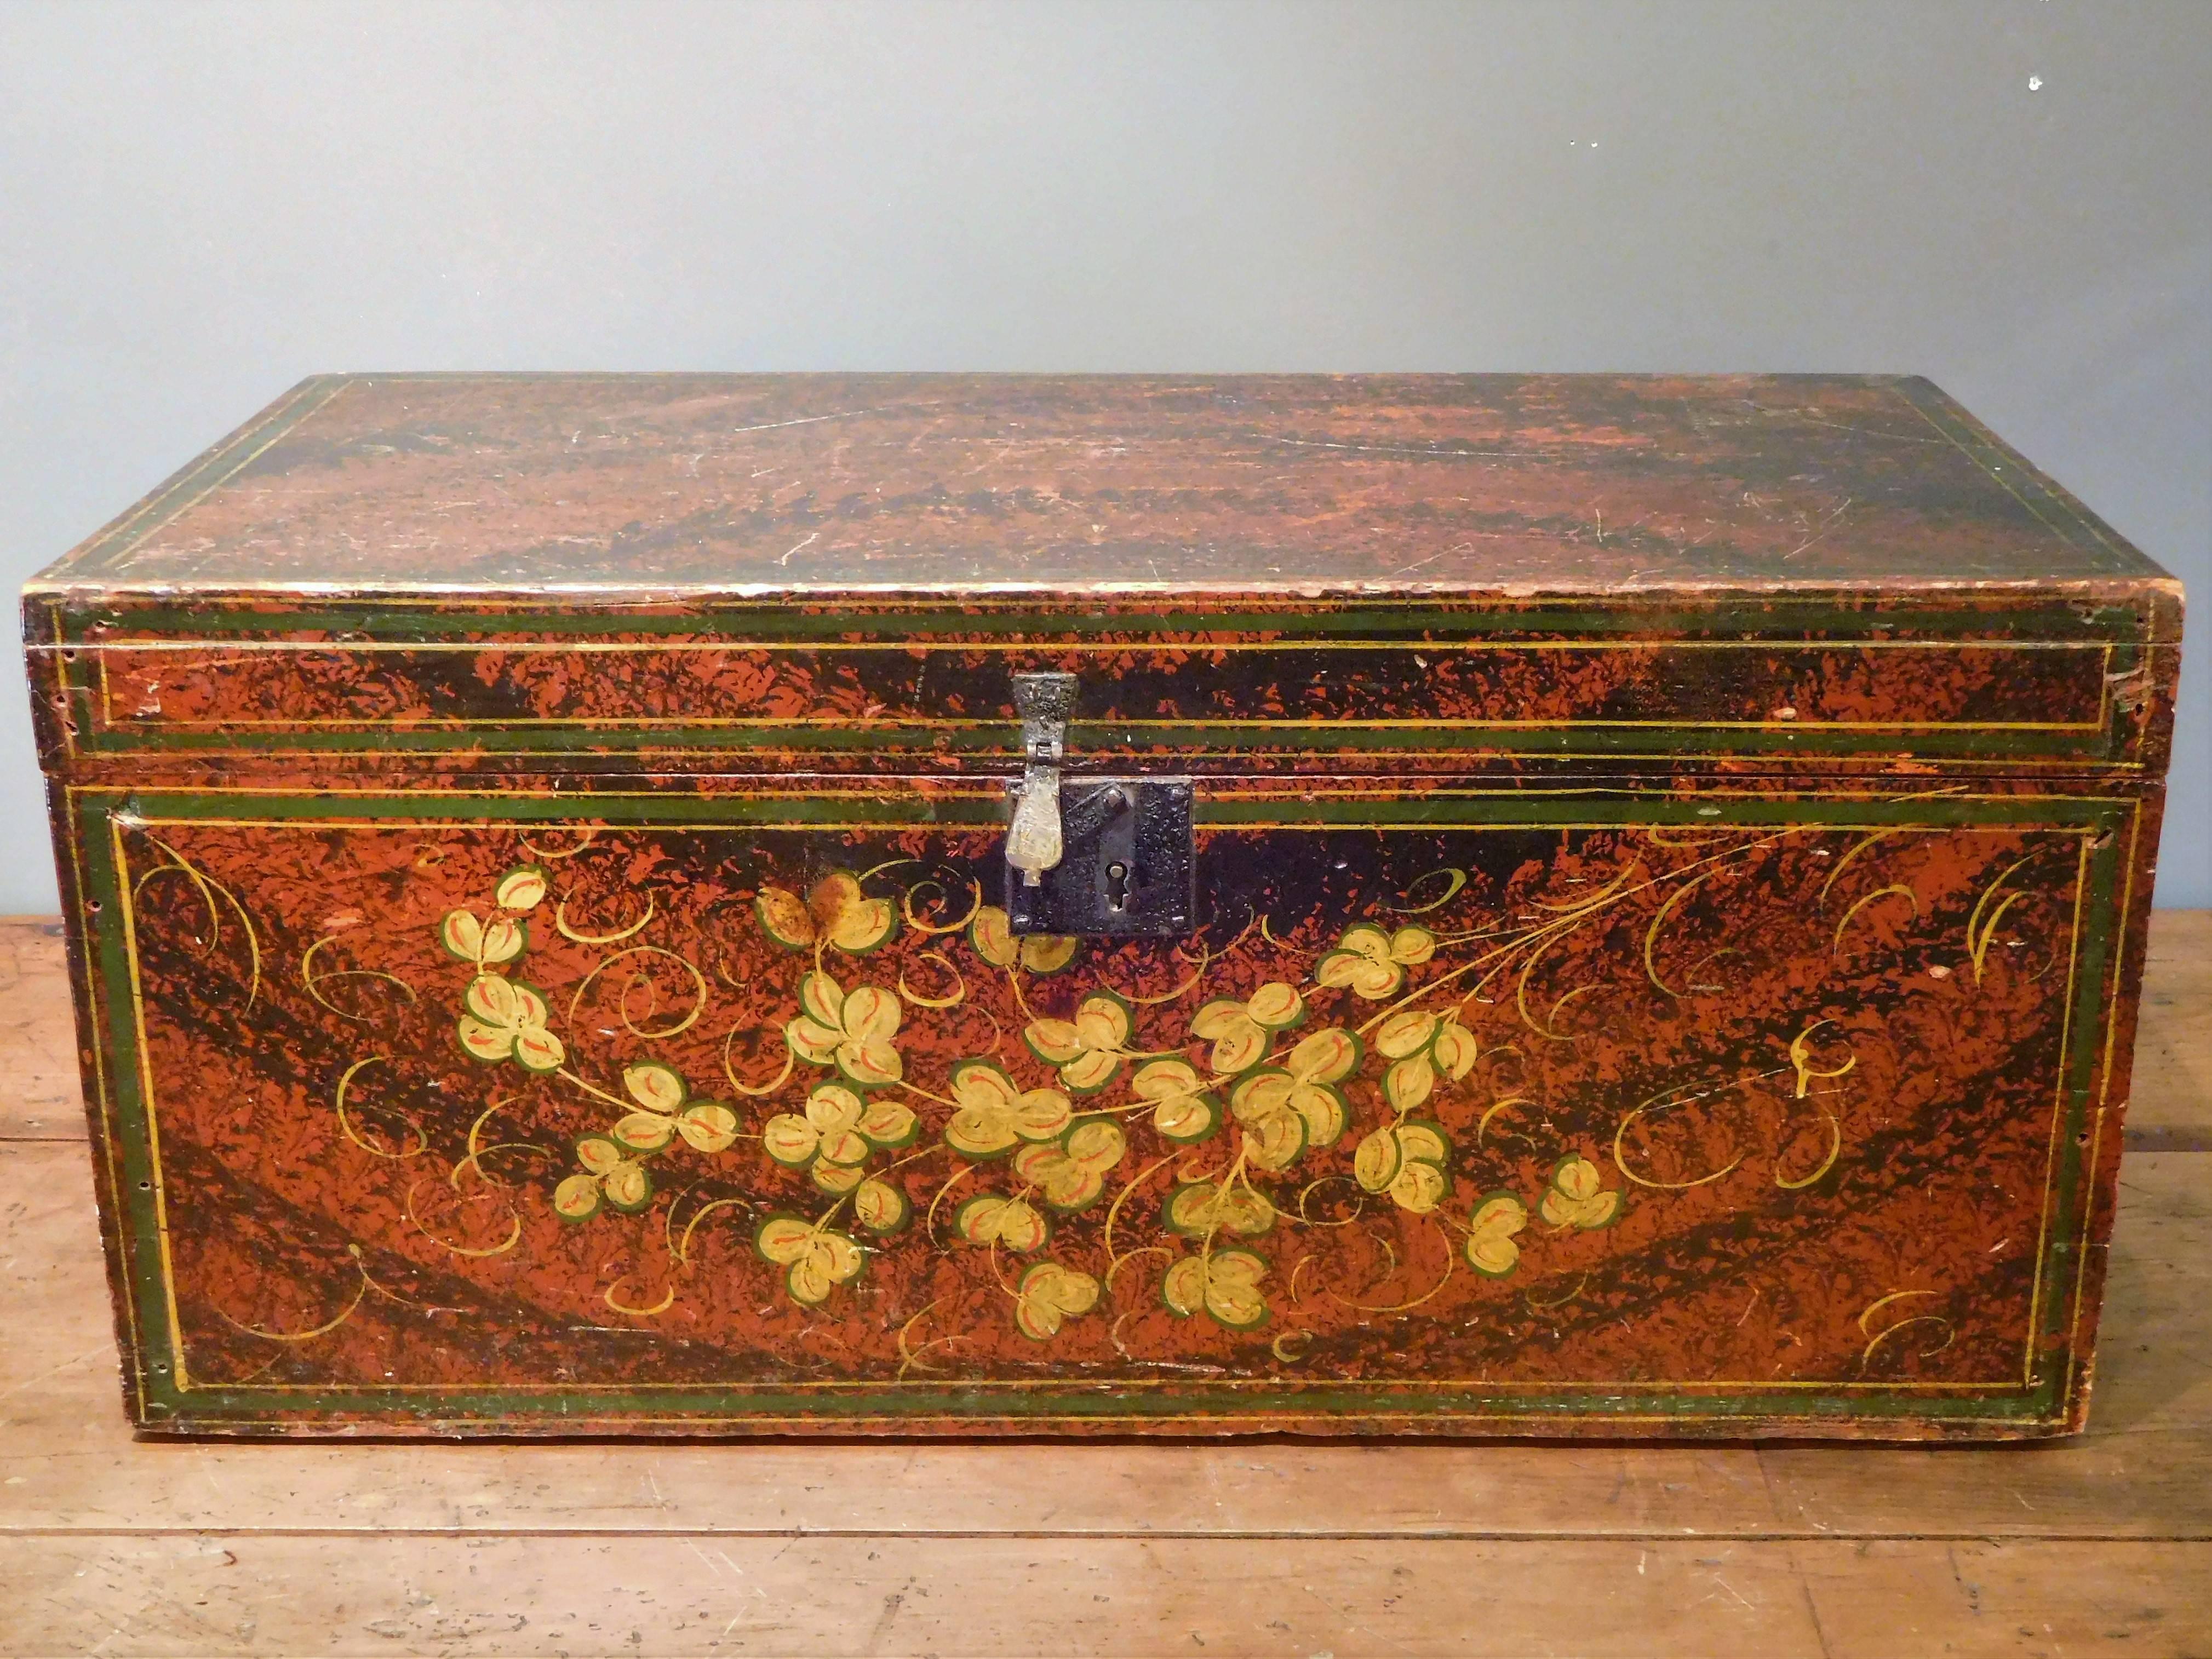 This handsome large document box is sponge-painted in black over red and has a spray of stenciled golden flowers along the front, with tendrils finished by hand. It is made of six pine boards with the lid attached by square iron hinges held in place